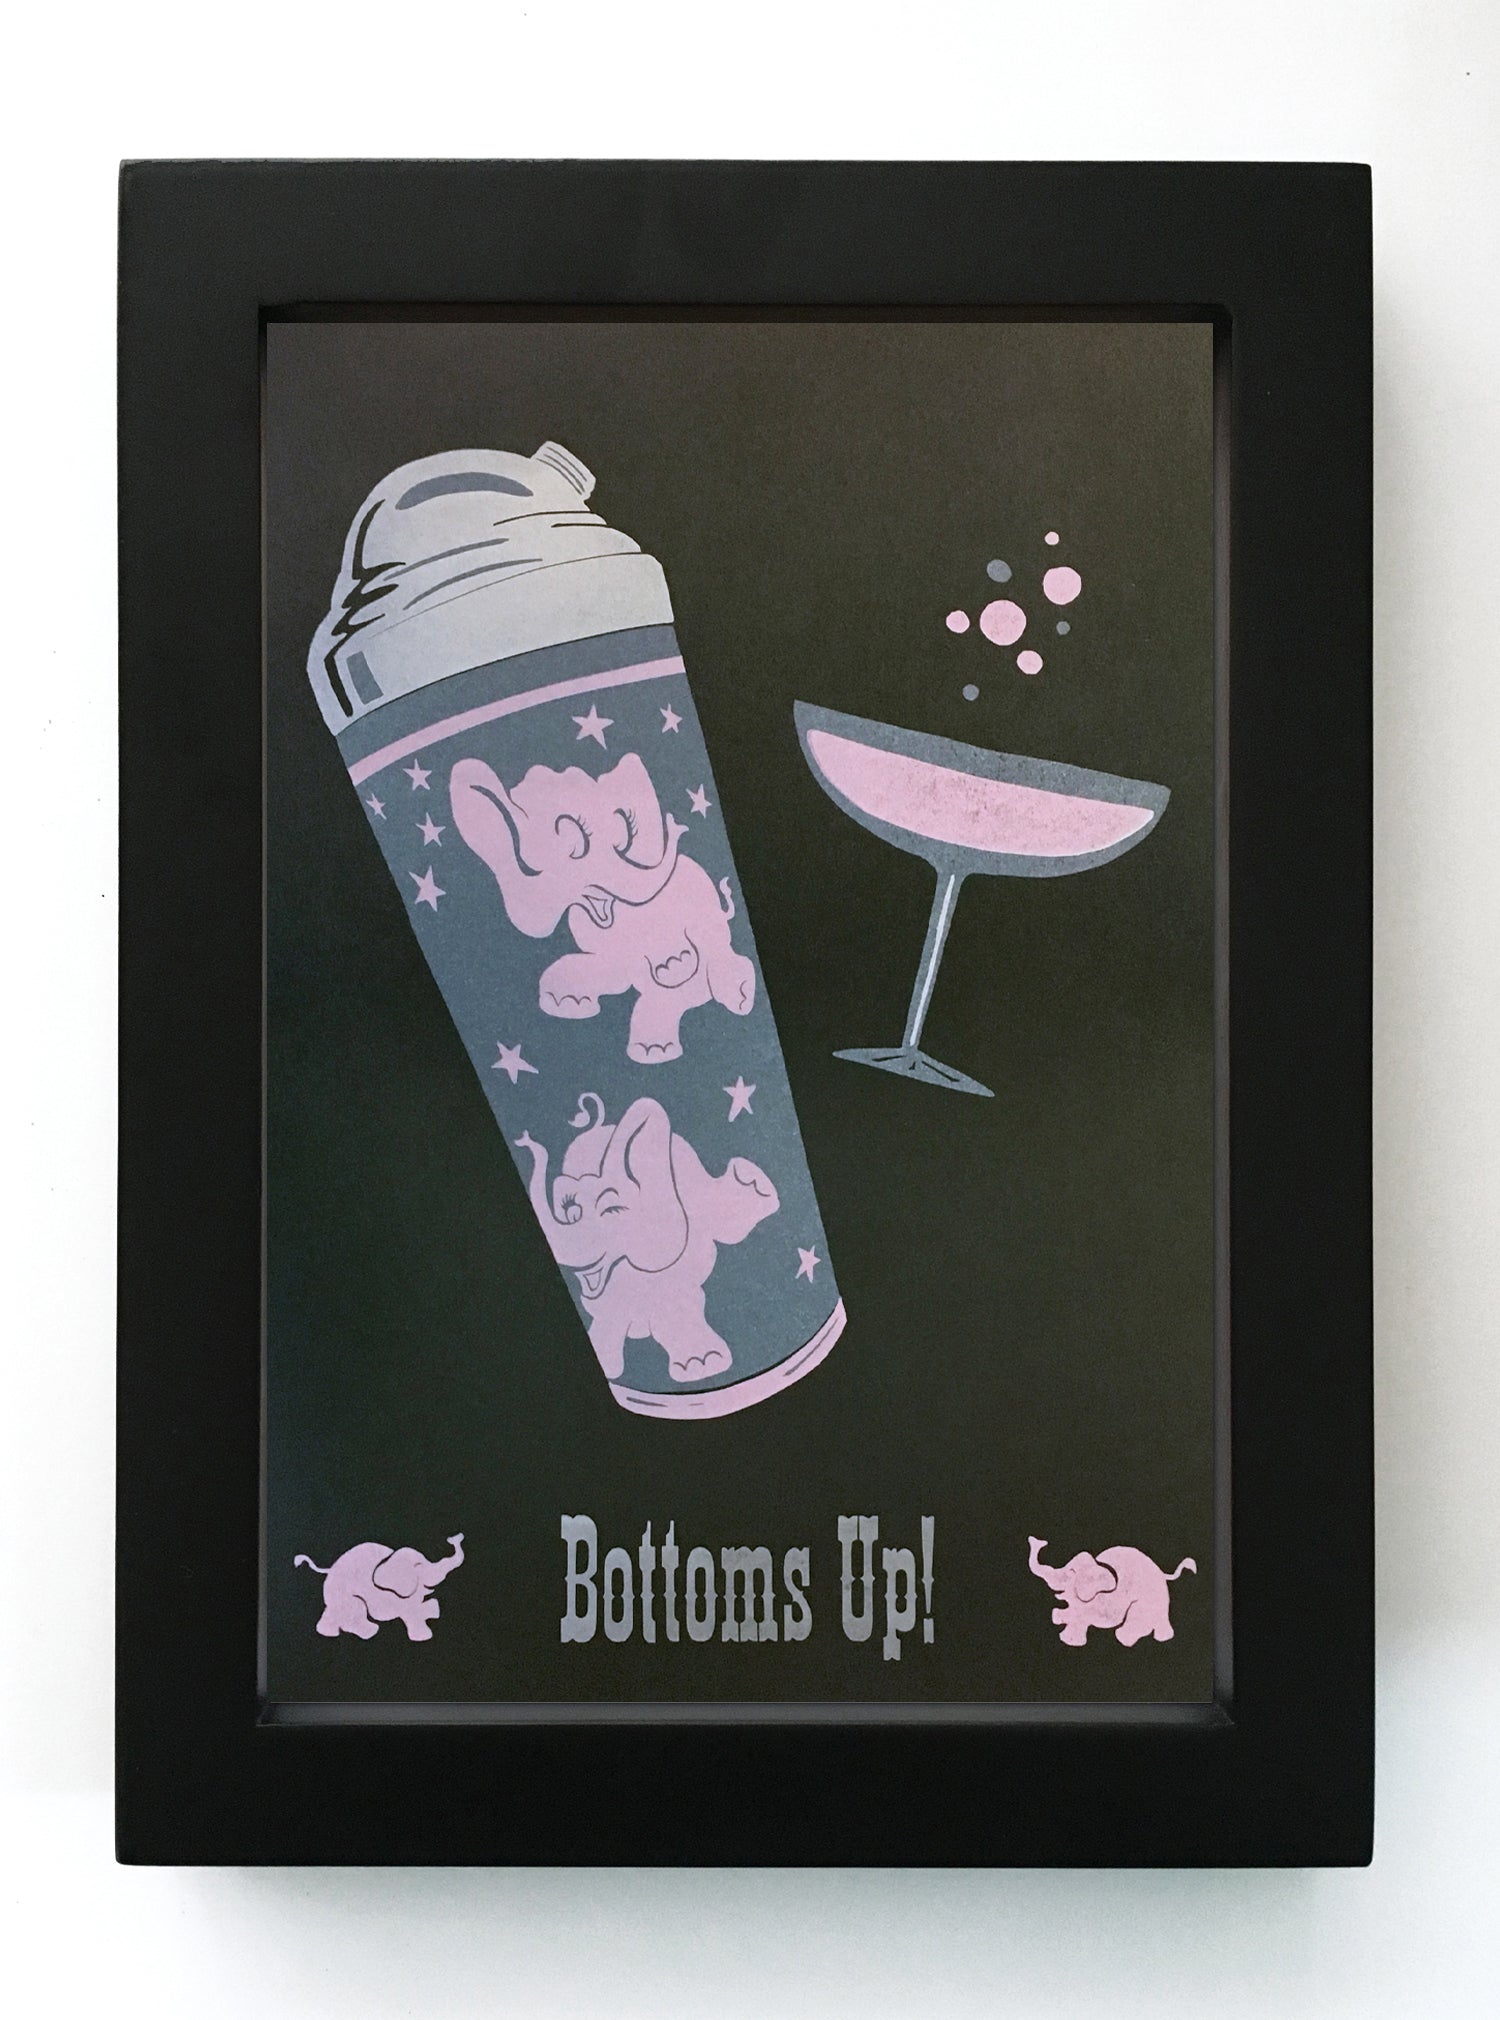 Bottoms Up! 5" x 7" Reproduction